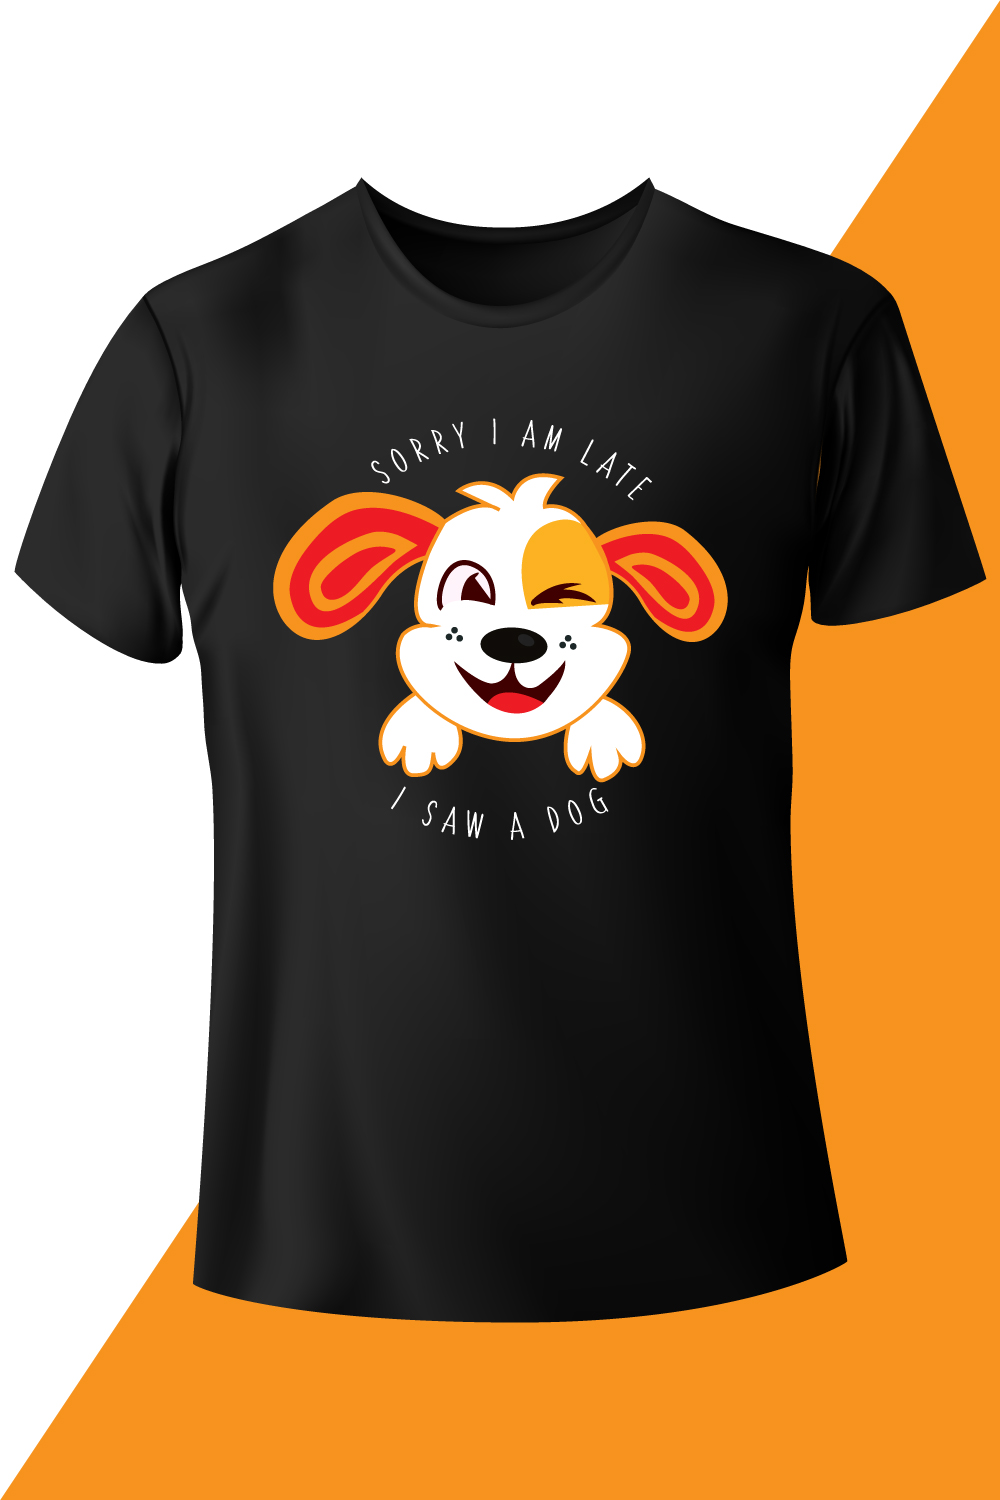 Image of a black t-shirt with a unique dog print and lettering.